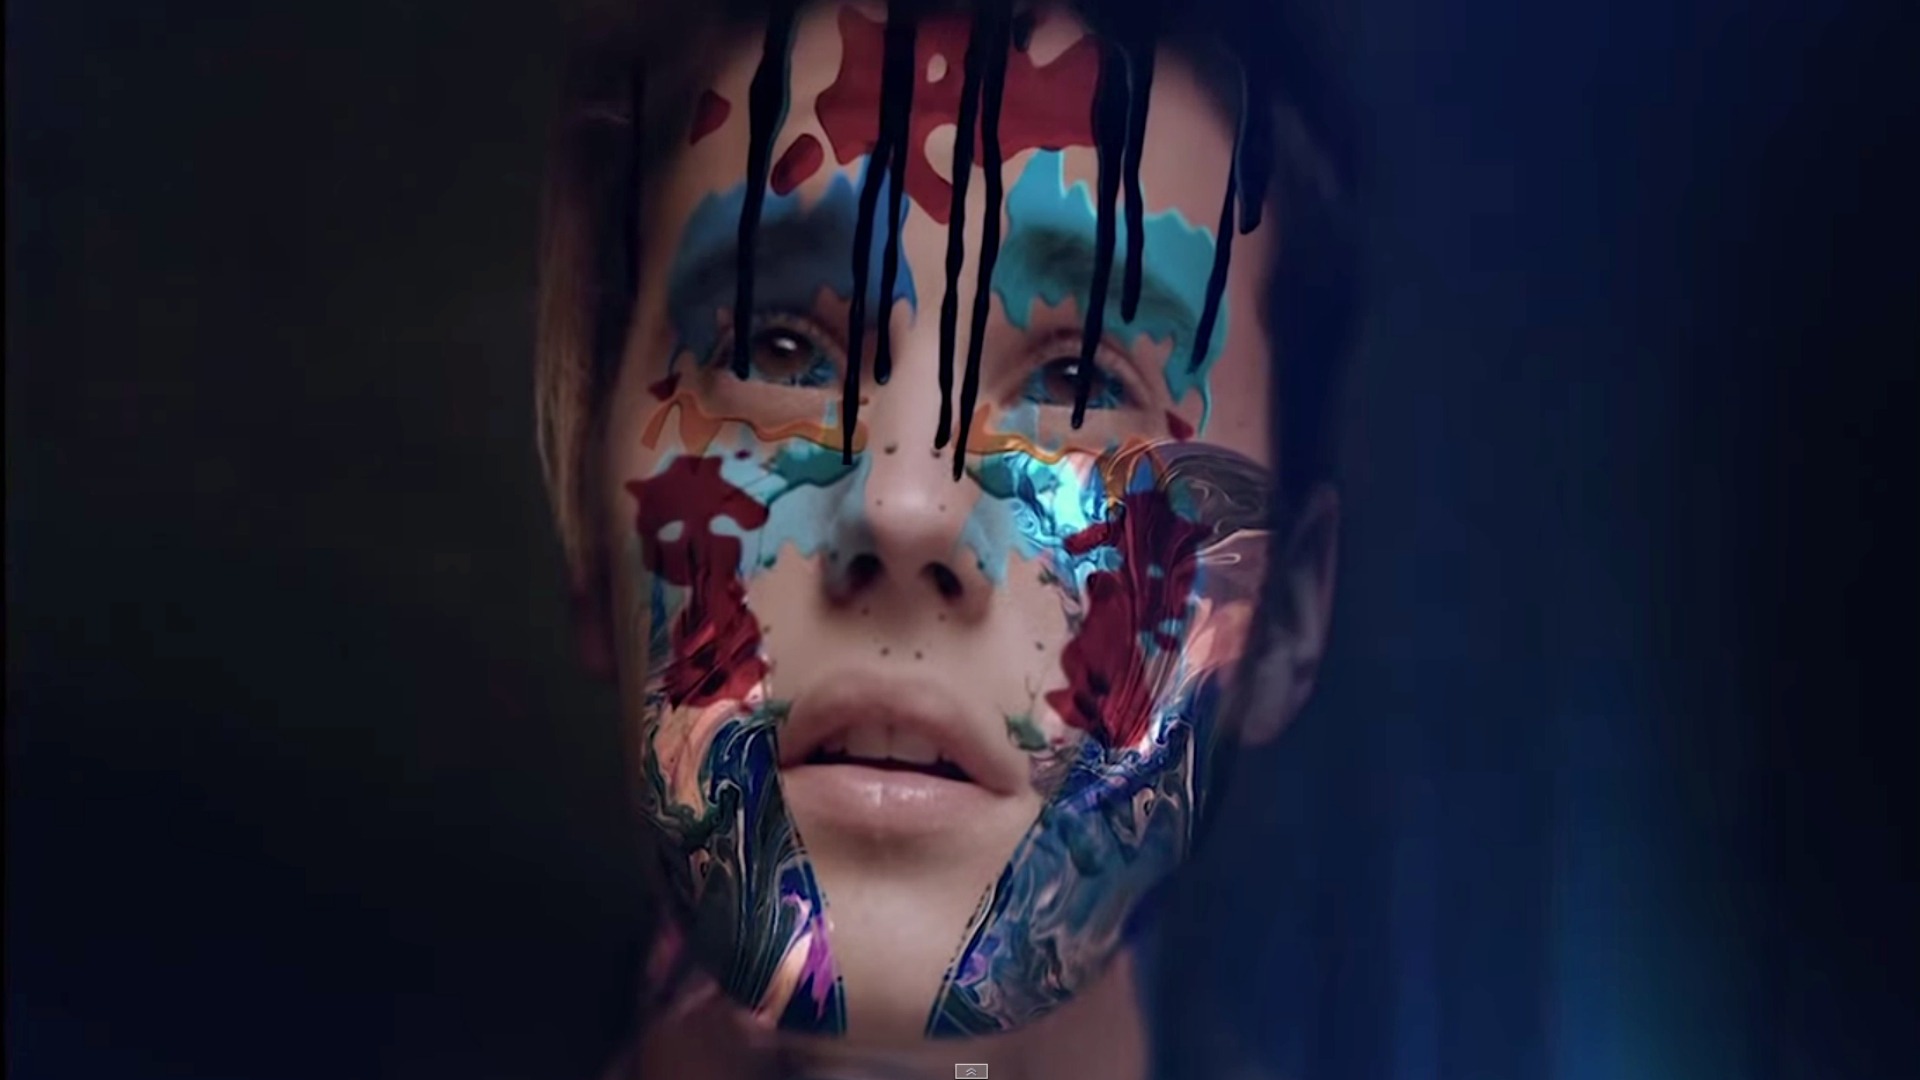 Jack Ü Feat - Justin Bieber Where Are You Now - HD Wallpaper 